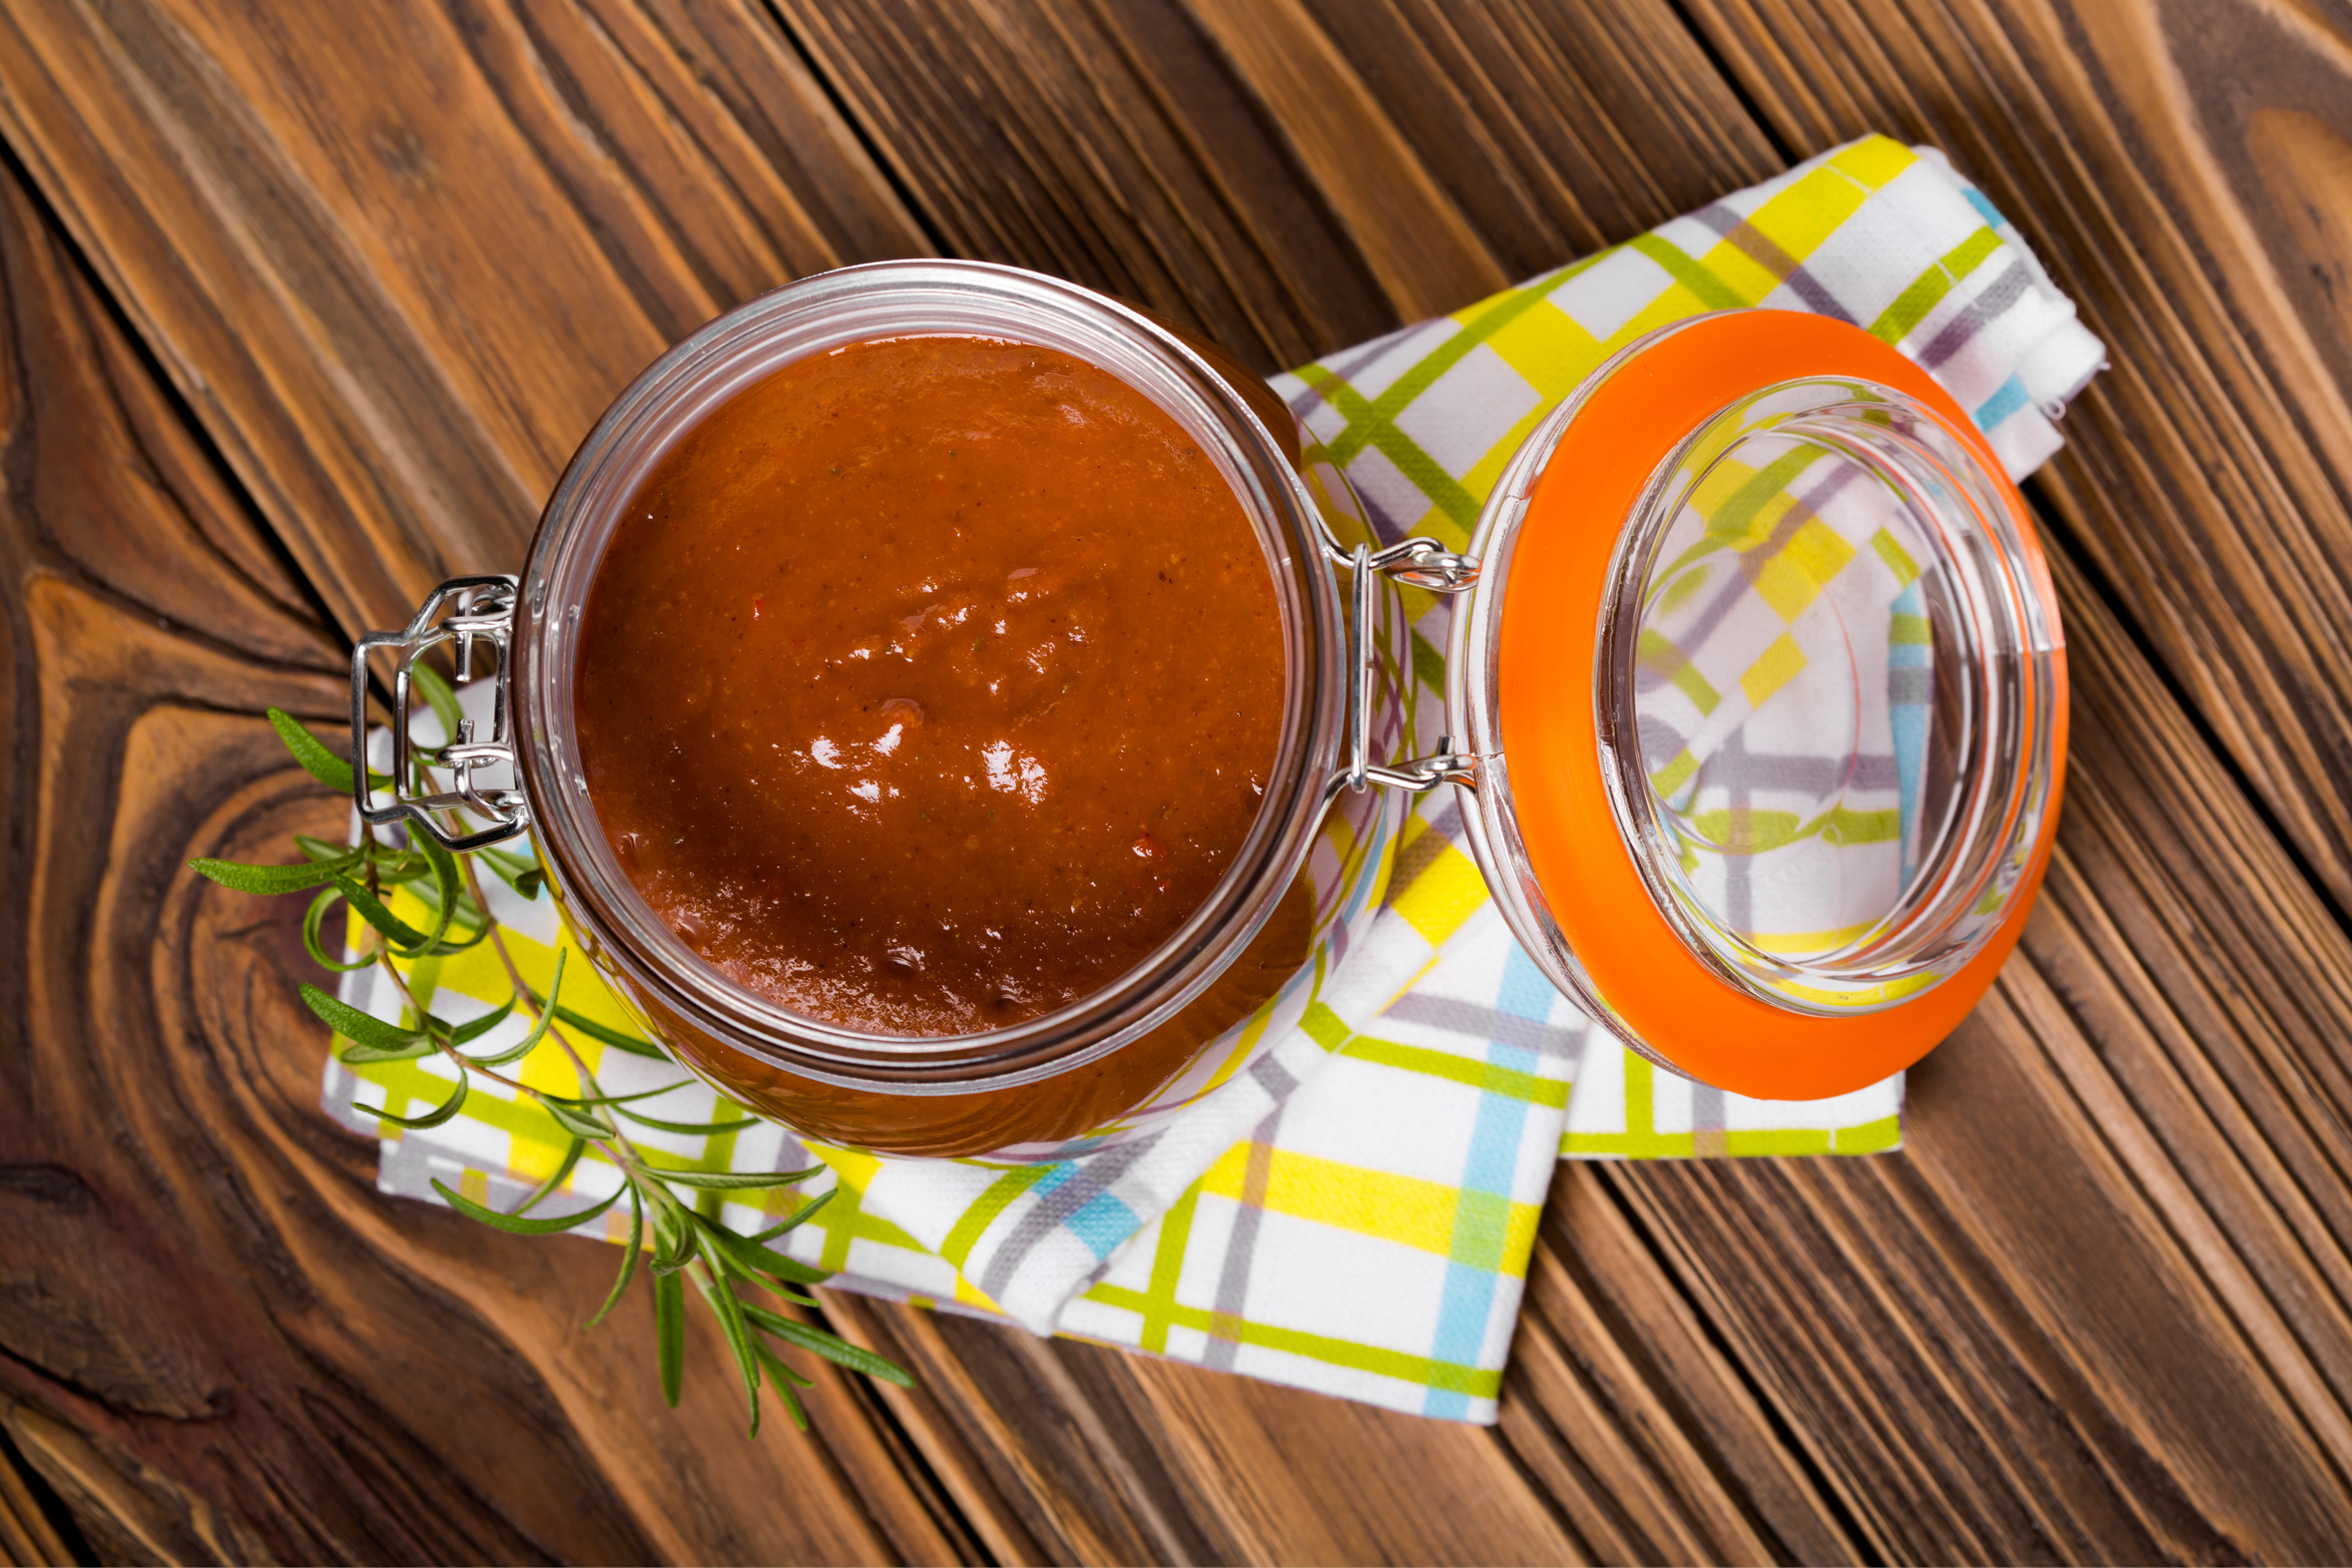 Homemade Dab-Infused BBQ Sauce from Home Grown Apothecary & Dispensary in Portland, Oregon